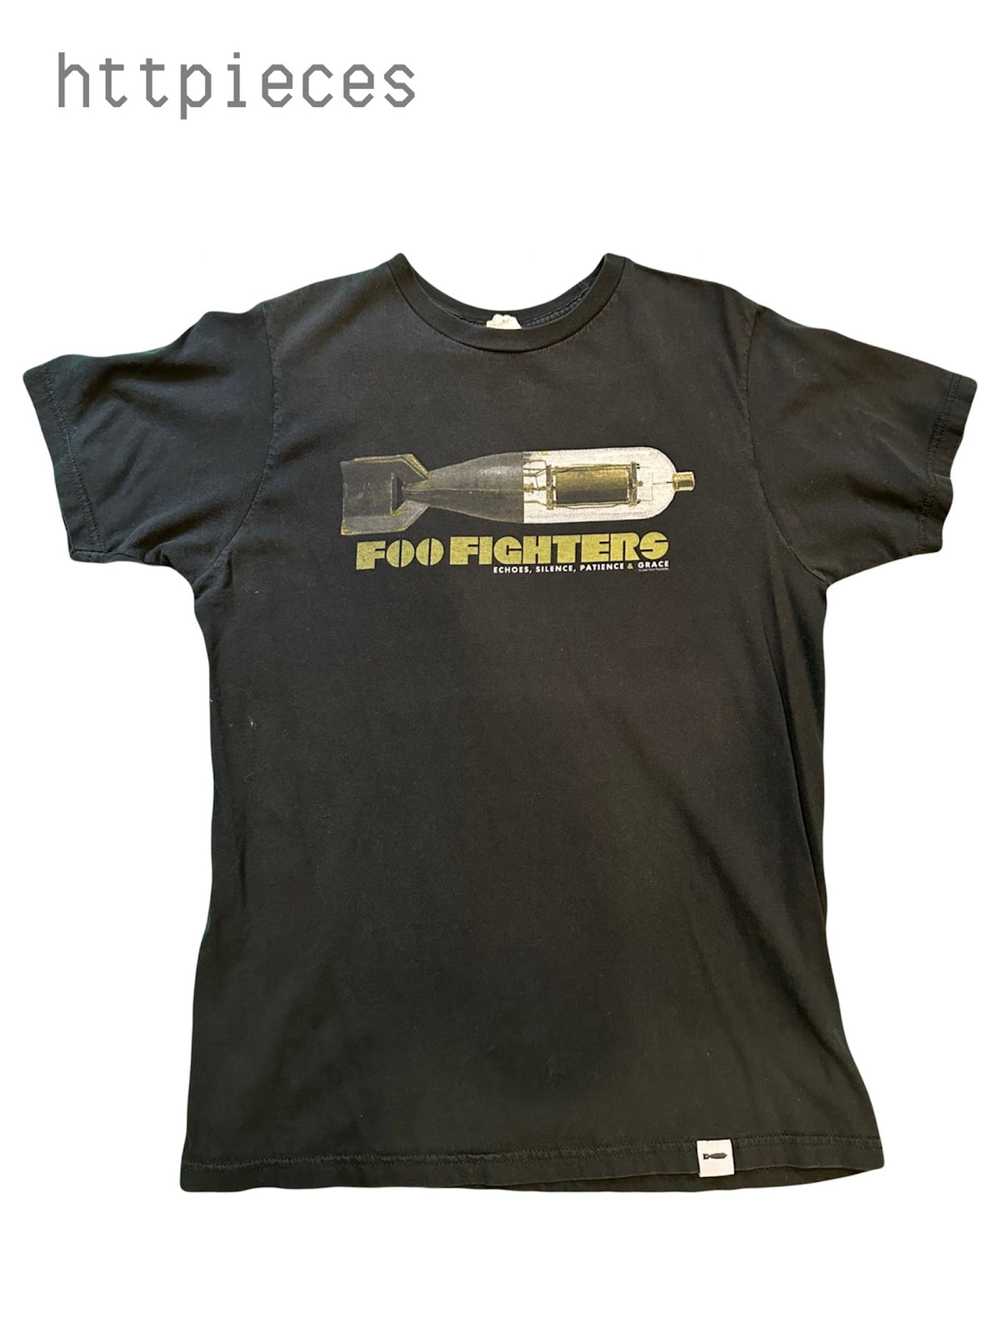 Band Tees 2008 Foo Fighters Tour t - image 1